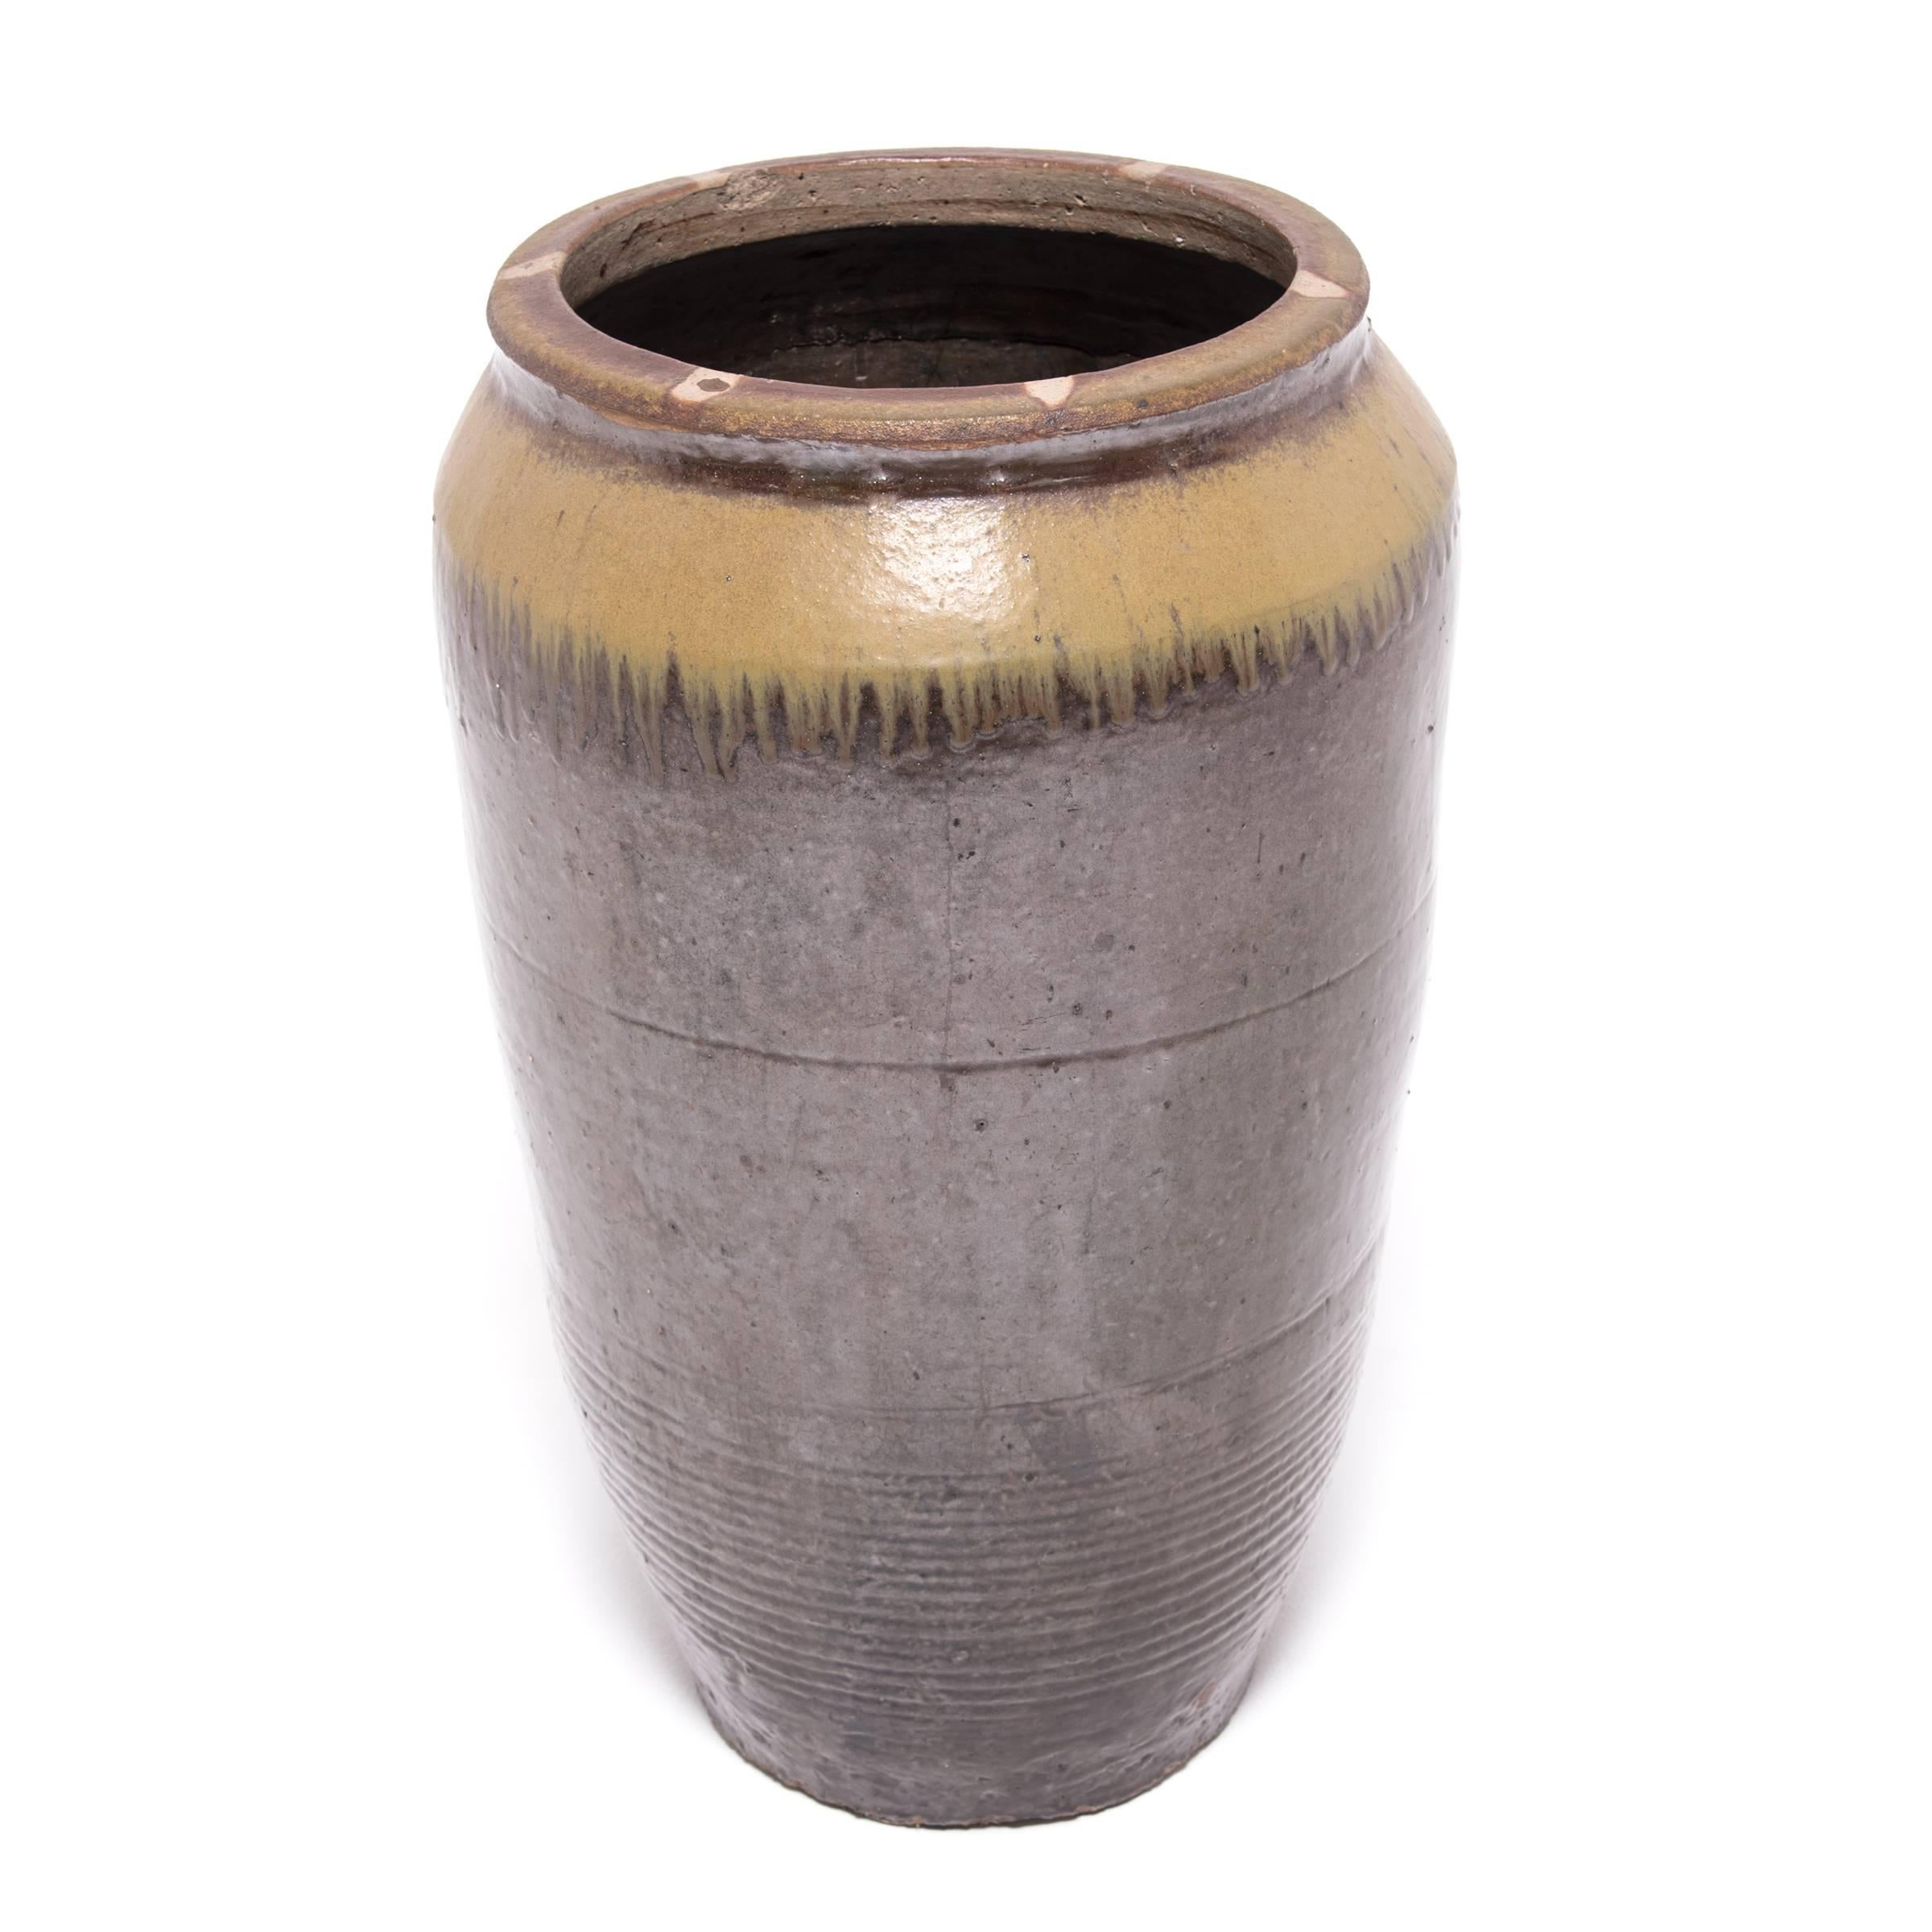 Used to store wine or other spirits, this tall jar dates from 1900. Choosing a simple shape, the potter shows off his talent in the beautiful glazing technique. A thin base glaze warms the surface while allowing the ripples of its spun manufacture